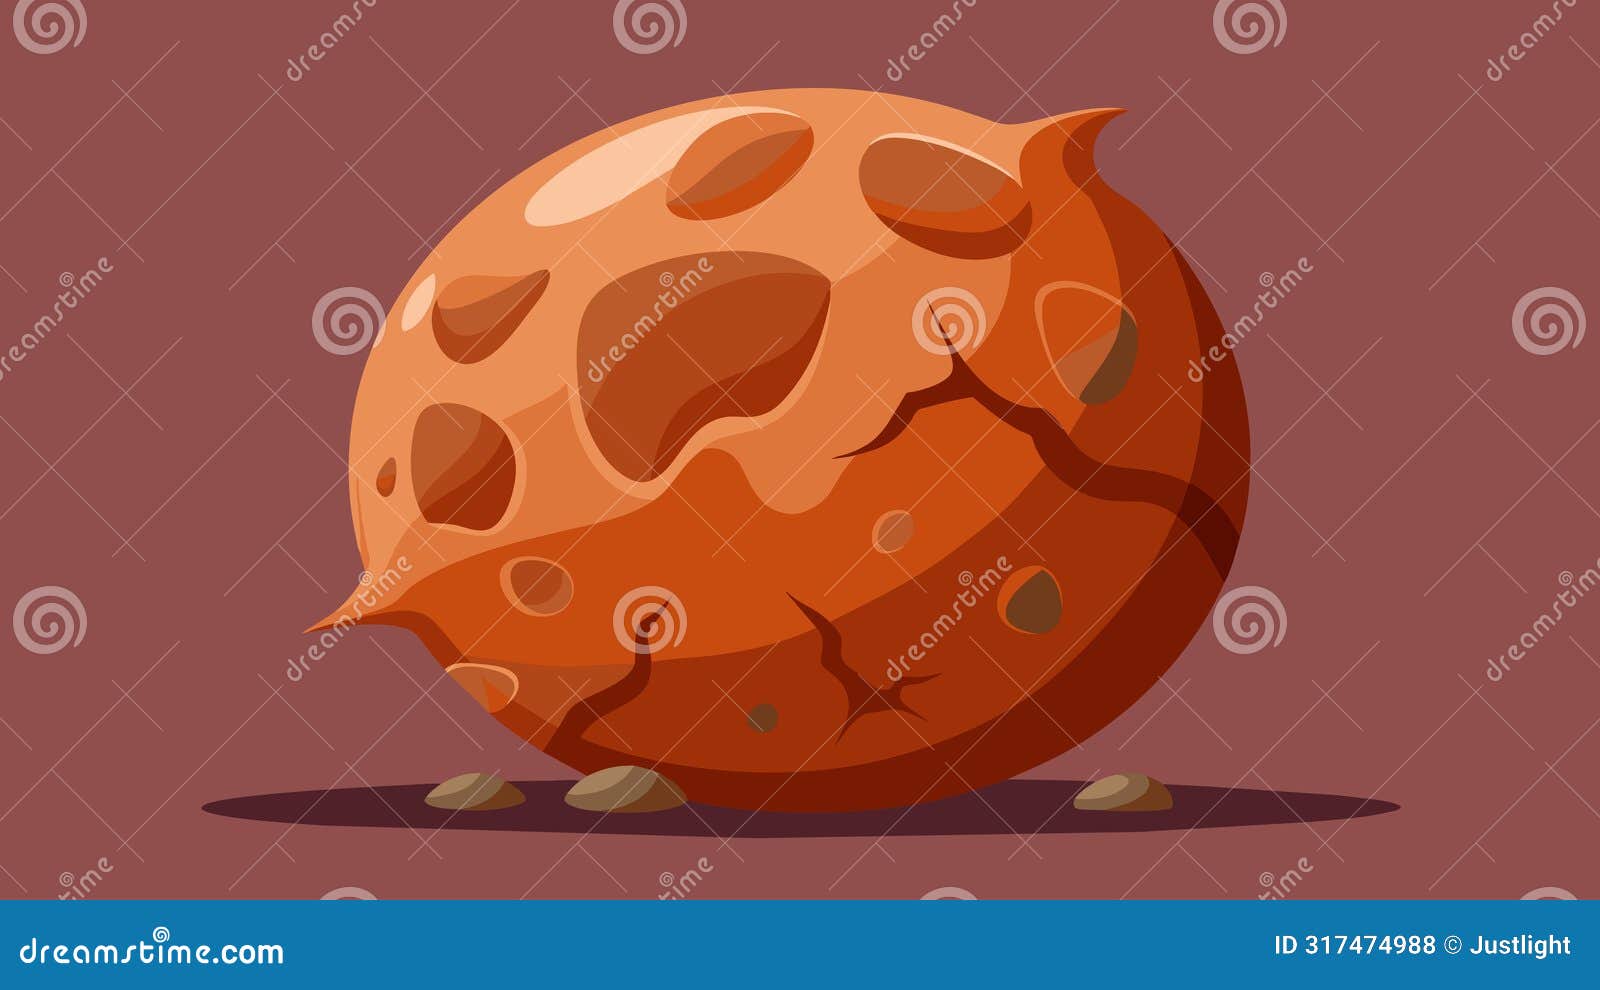 the image of a large cled ball of clay with harsh indentations and crevices representing the weight and heaviness of